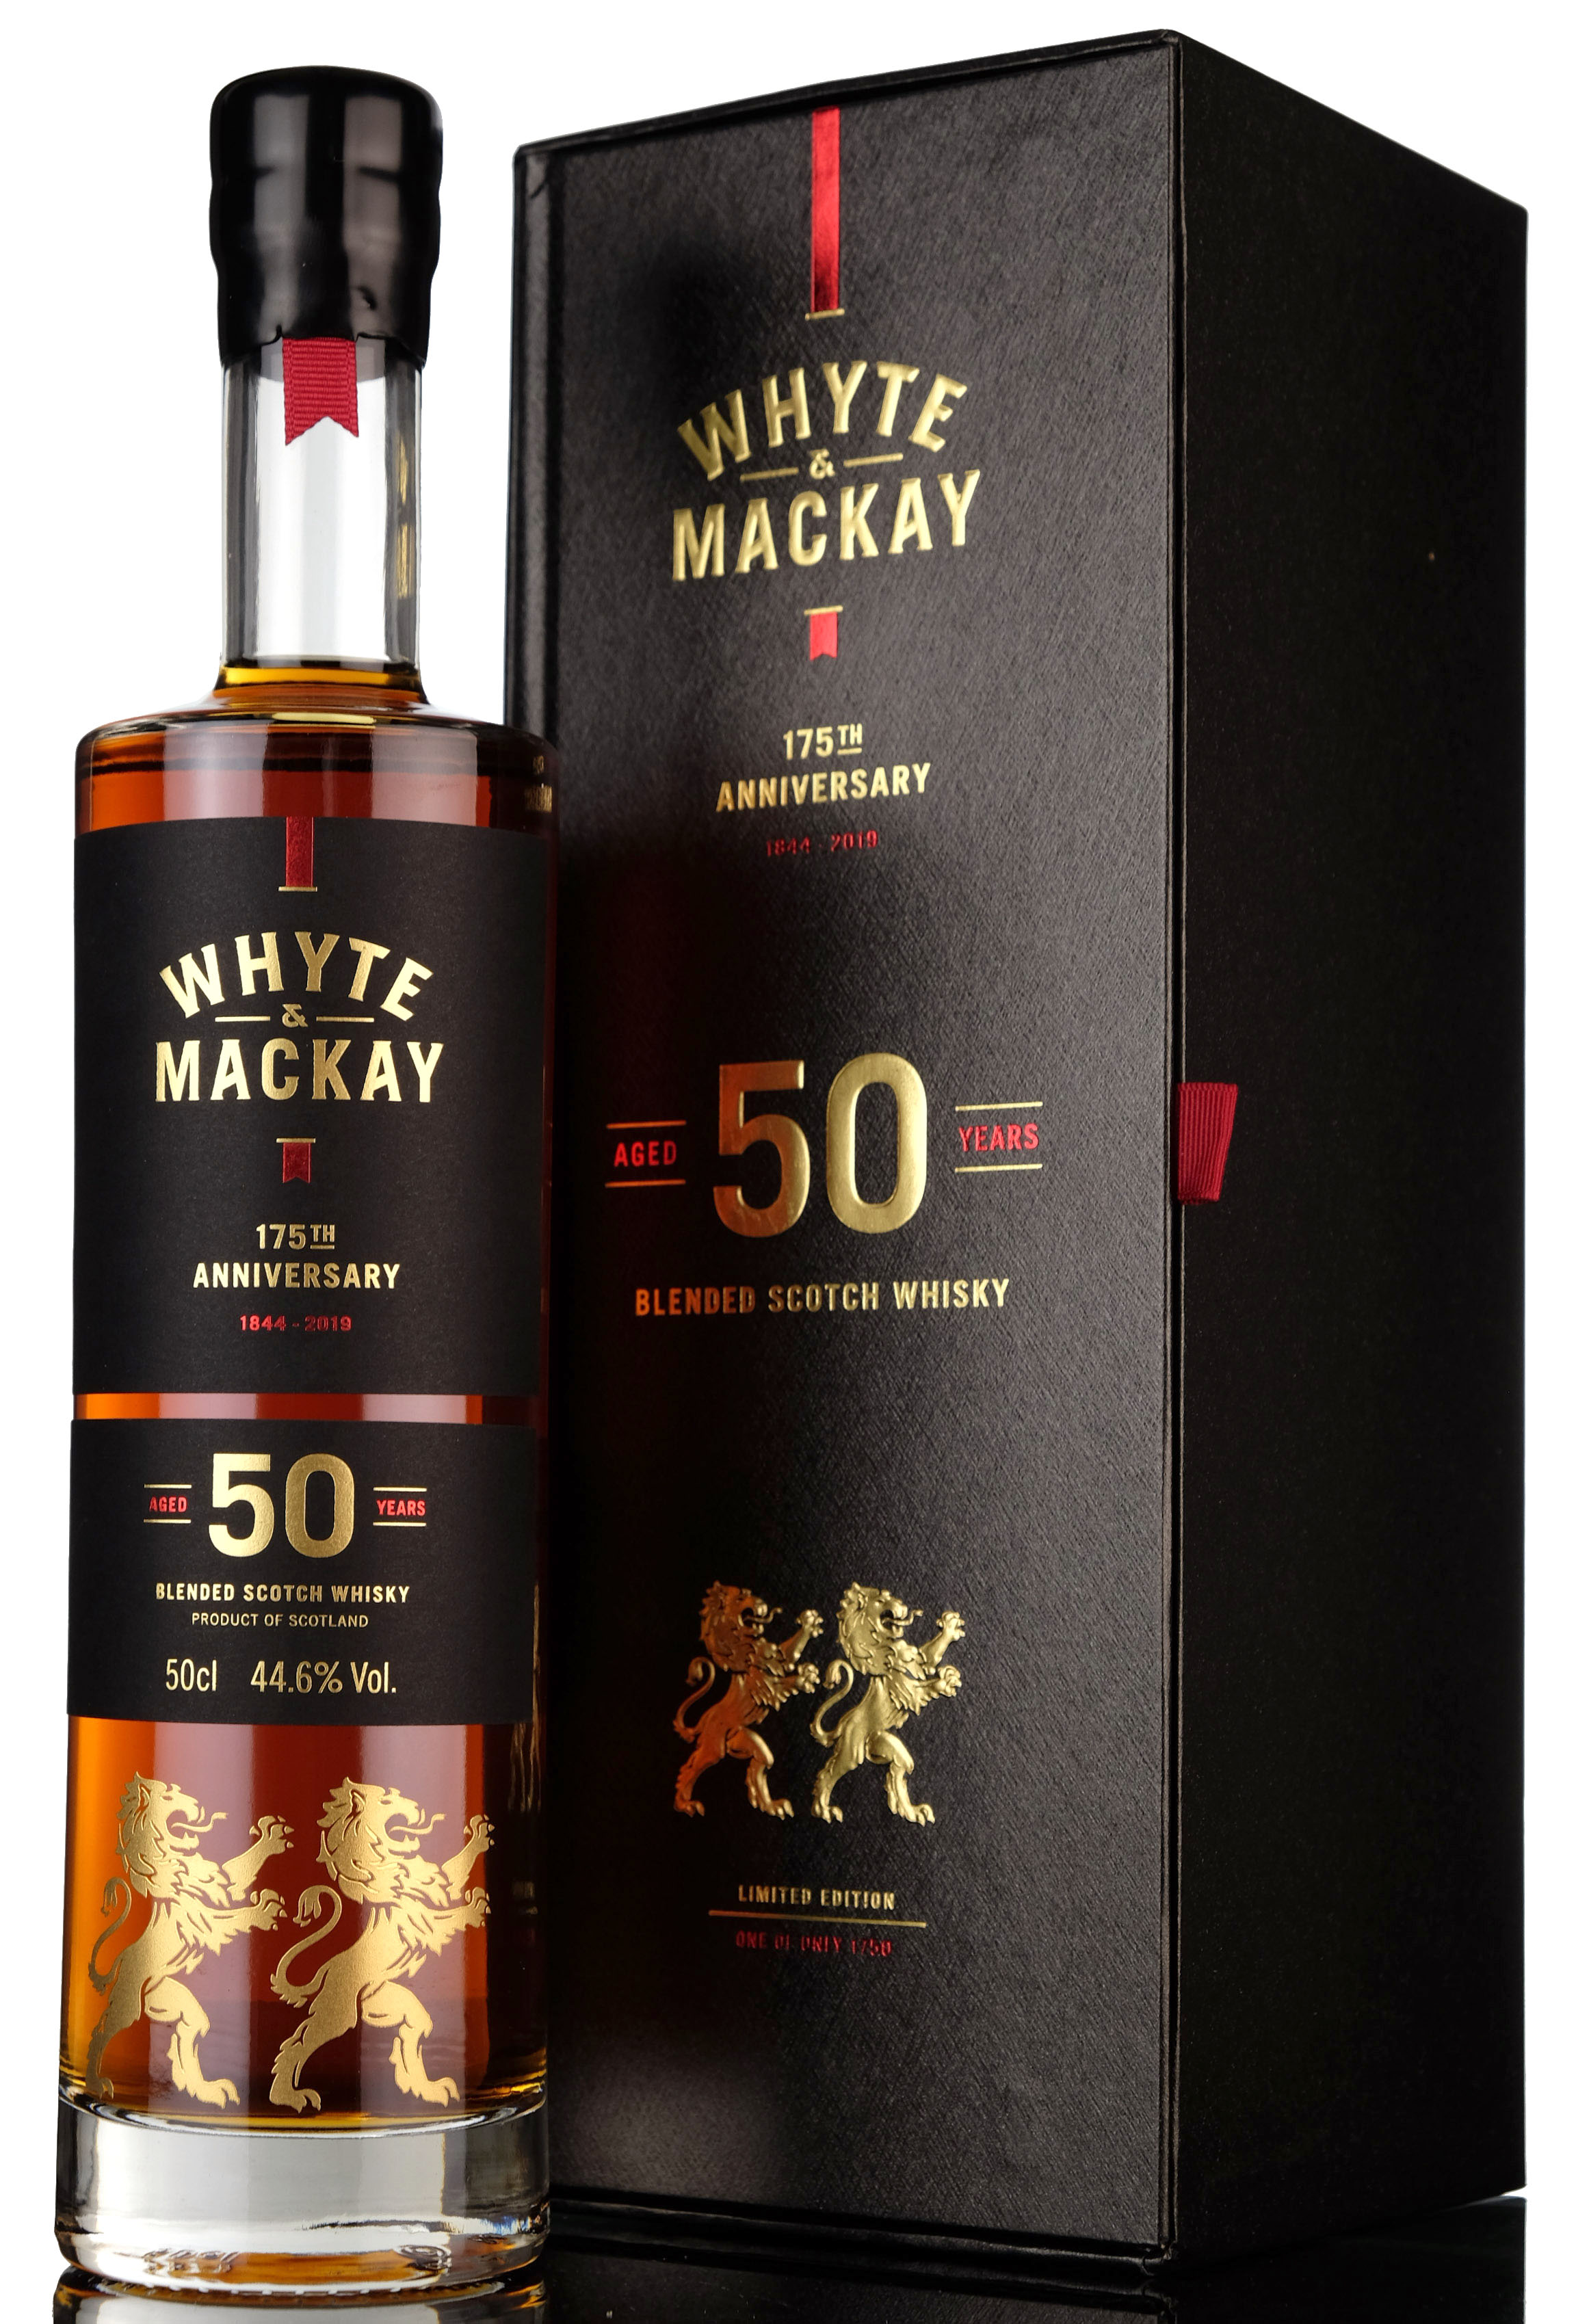 Whyte & MacKay 50 Year Old - 175th Anniversary - 50cl